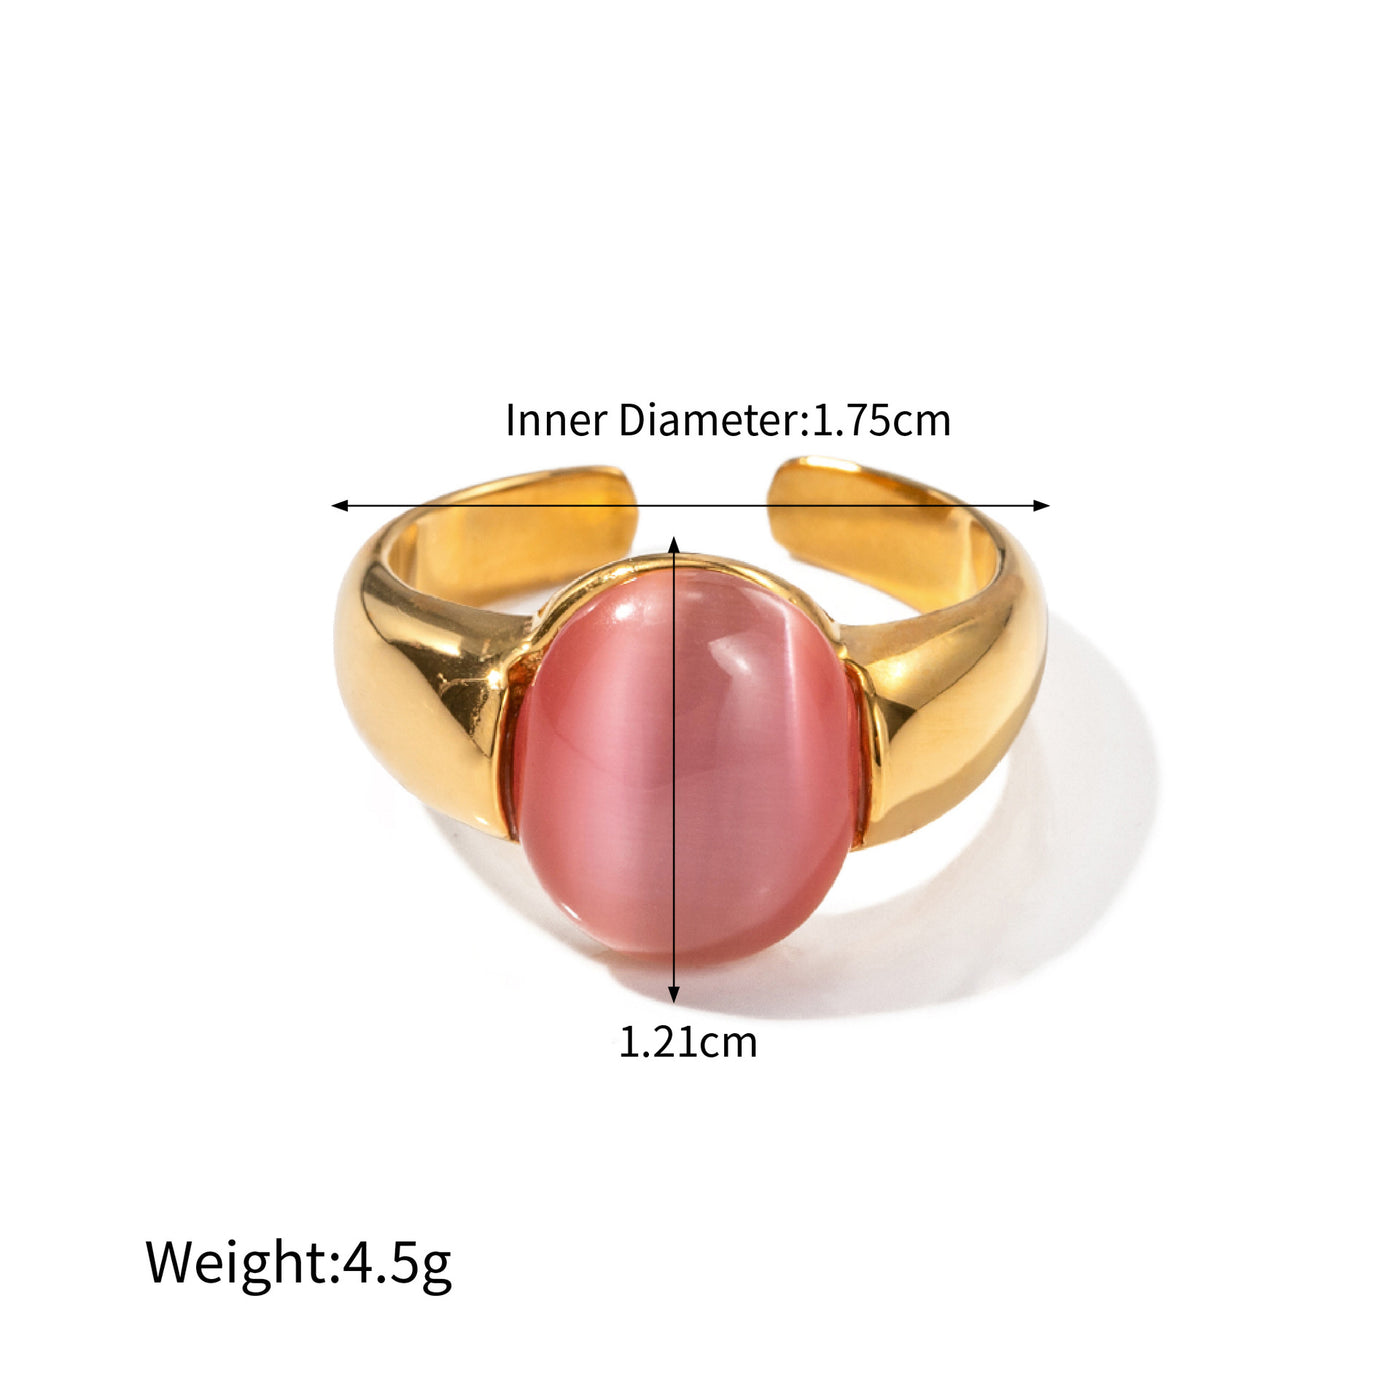 18K gold noble oval inlaid pink cat's eye design ring - Syble's